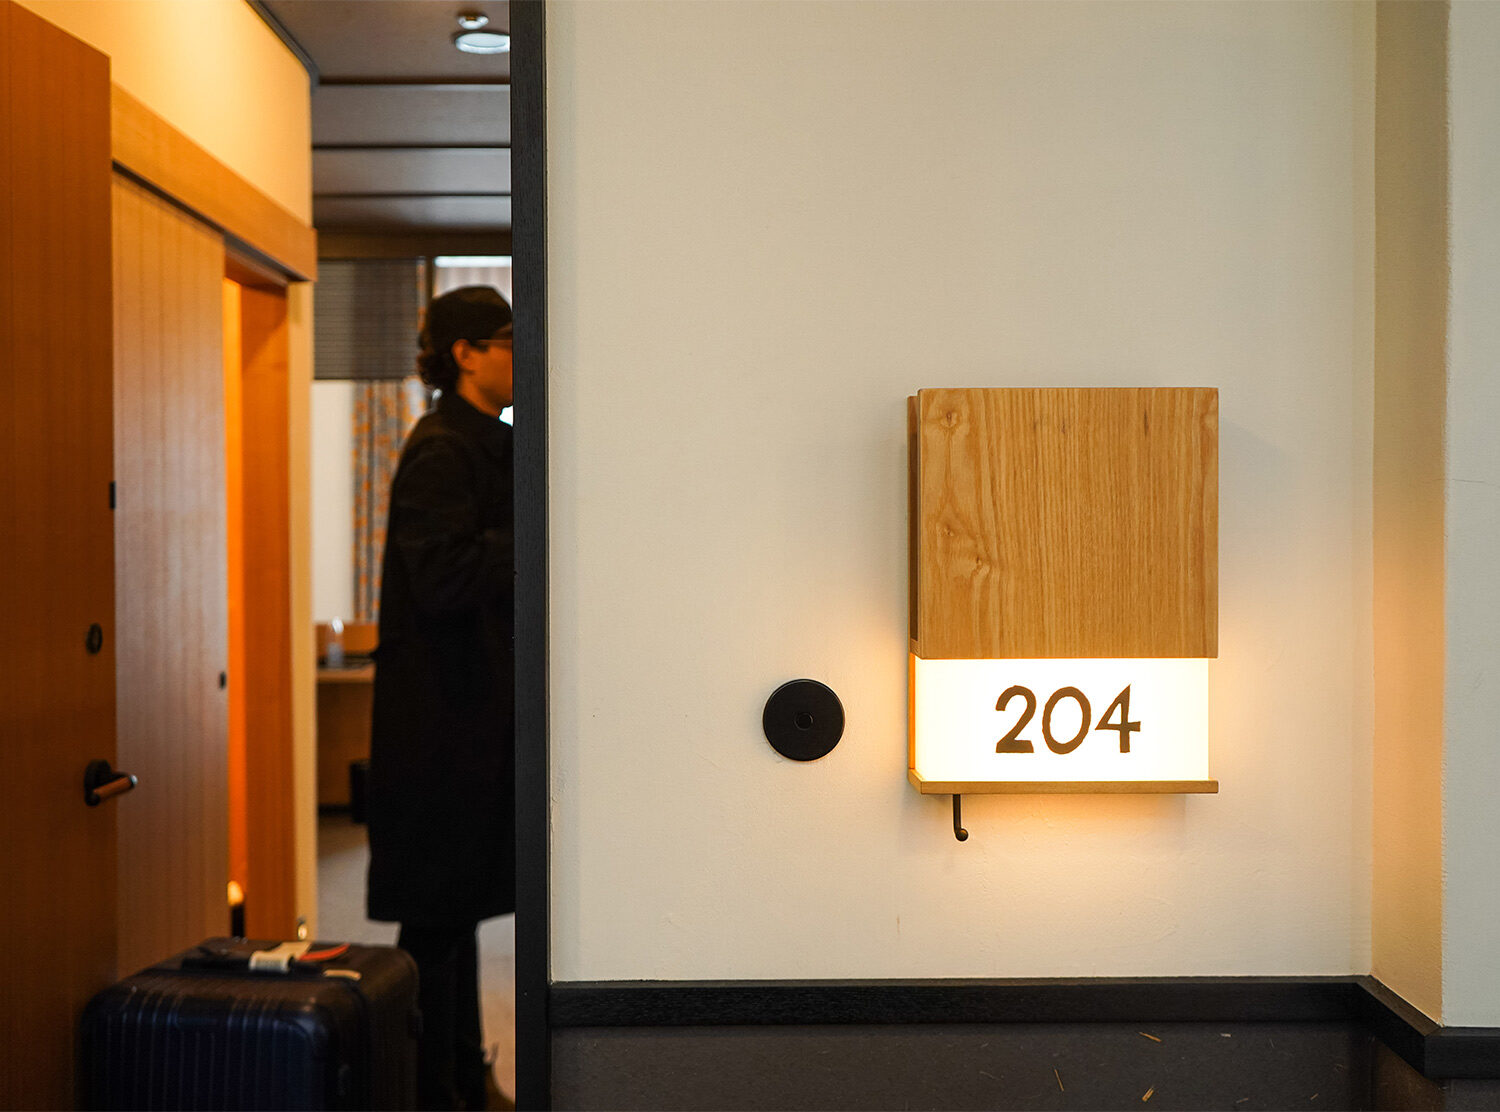 Ace Hotel Kyoto They commissioned a one-hundred-year-old artist named Samiro Yunoki to create their custom typeface. We loved finding it in the details throughout the property. Nice touch